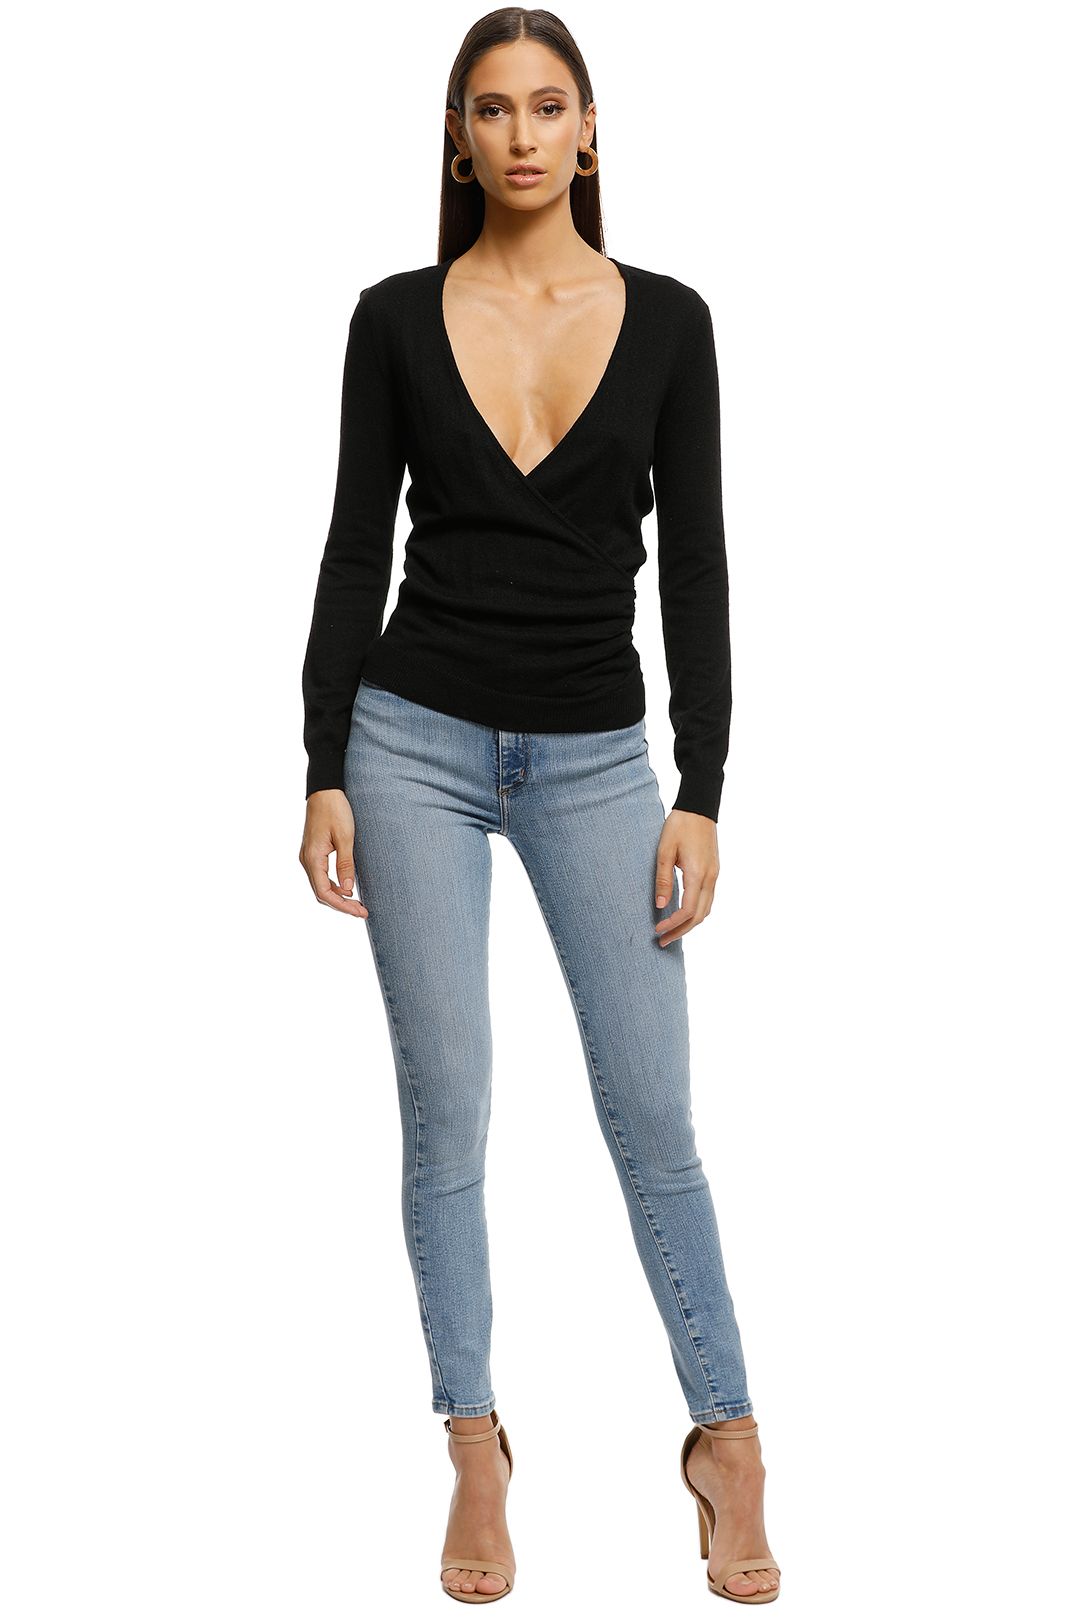 Rodeo Show - Stevie Knit - Black - Front